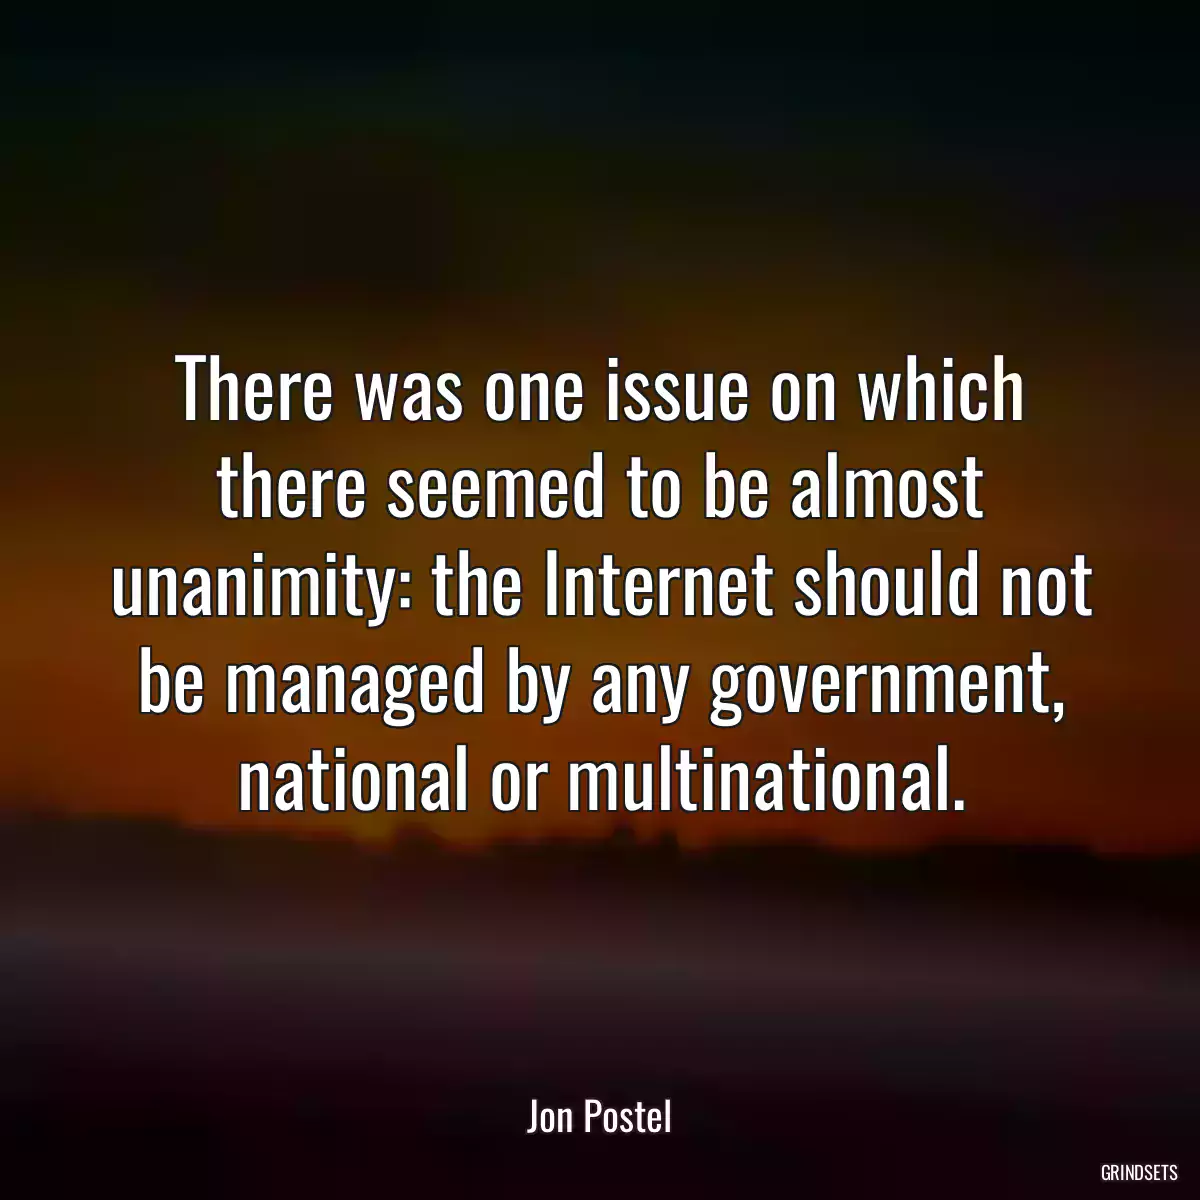 There was one issue on which there seemed to be almost unanimity: the Internet should not be managed by any government, national or multinational.